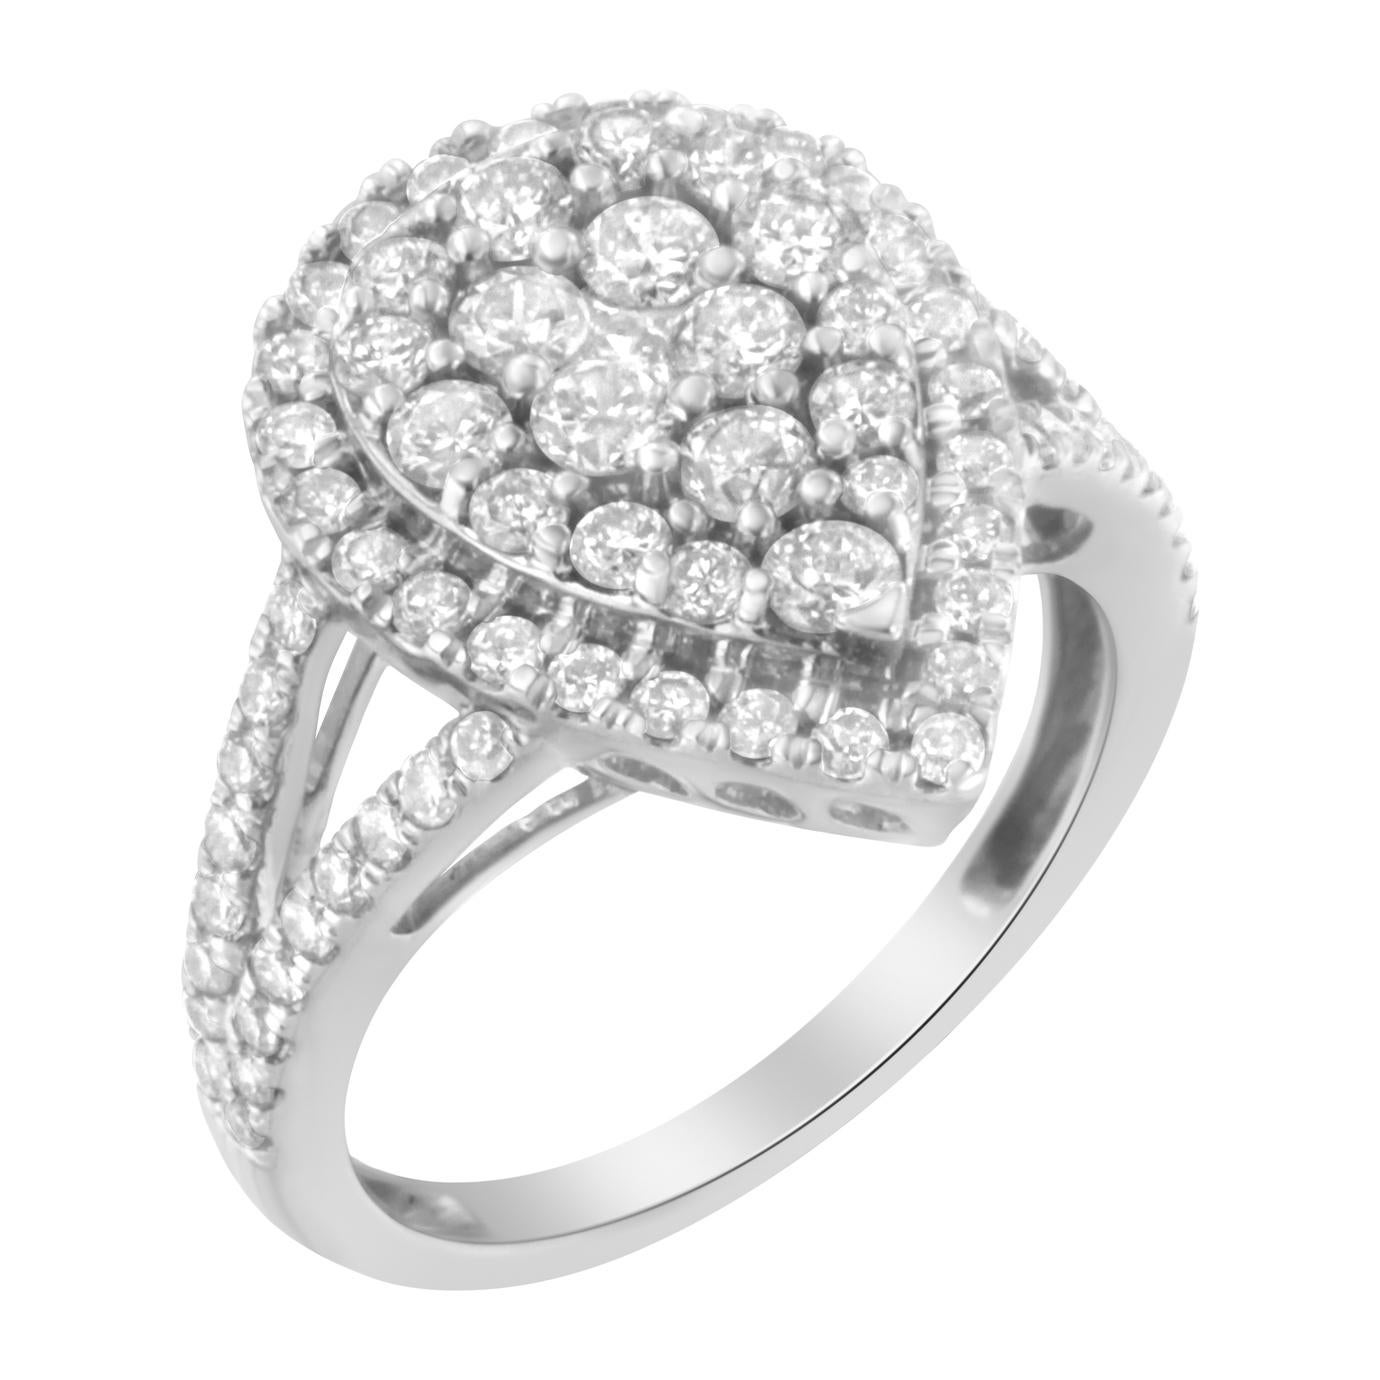 Modern .925 Sterling Silver 1 1/2 Cttw Diamond Cluster Ring (H-I Color, I1-I2 Clarity) For Sale